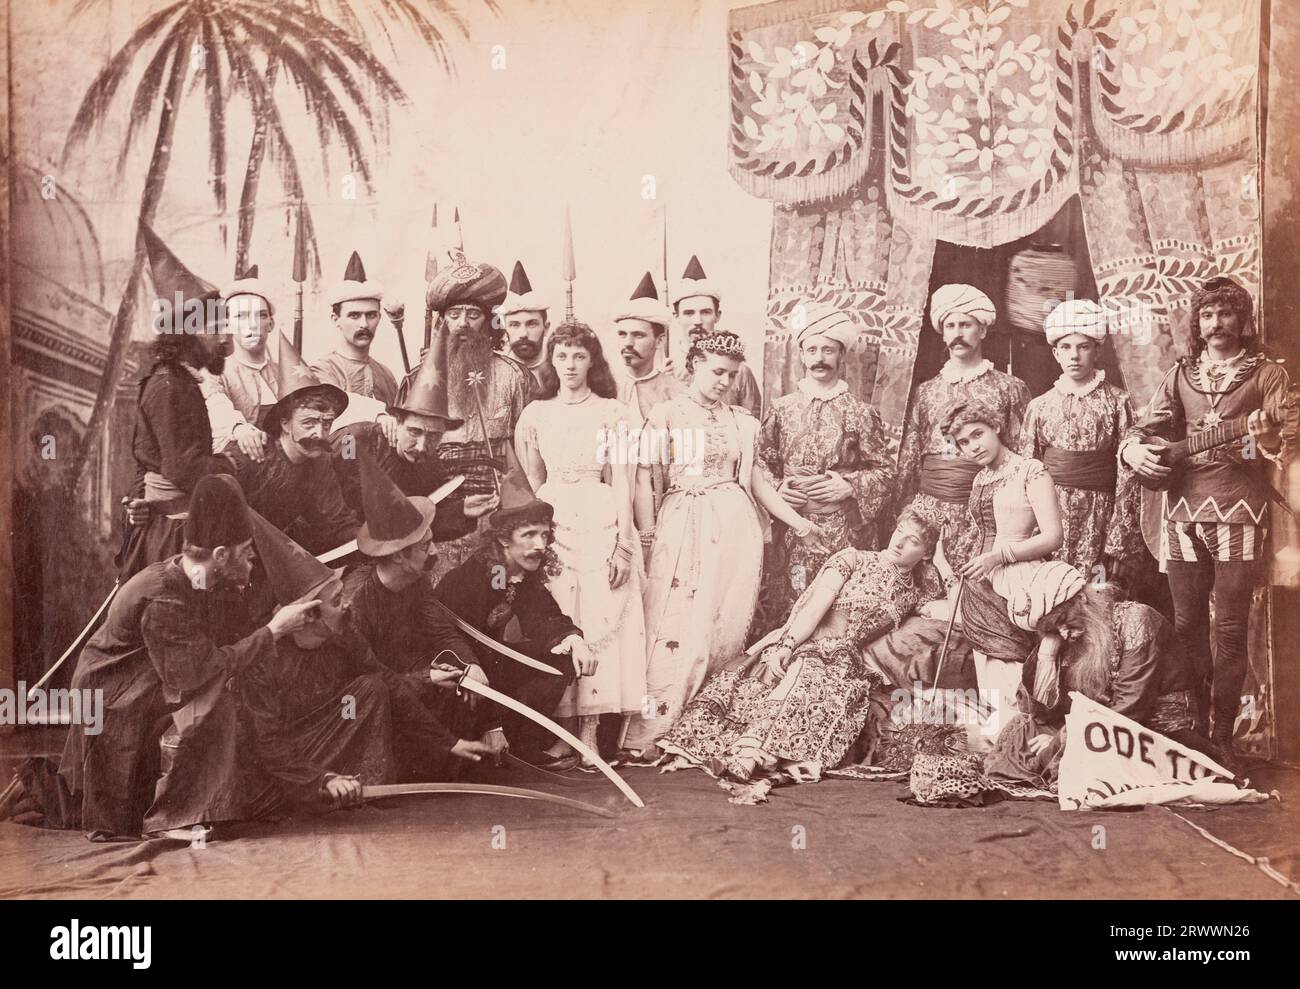 Group portrait of European men and women dressed in costumes for a theatrical production of Lalla Rookh. They pose on a stage with painted backdrops and set behind them, dressed in a variety of orientalist and medieval costumes. Lalla Rookh is a romance by Thomas Moore, published in 1817. Caption reads: Lalla Rookh. Stock Photo